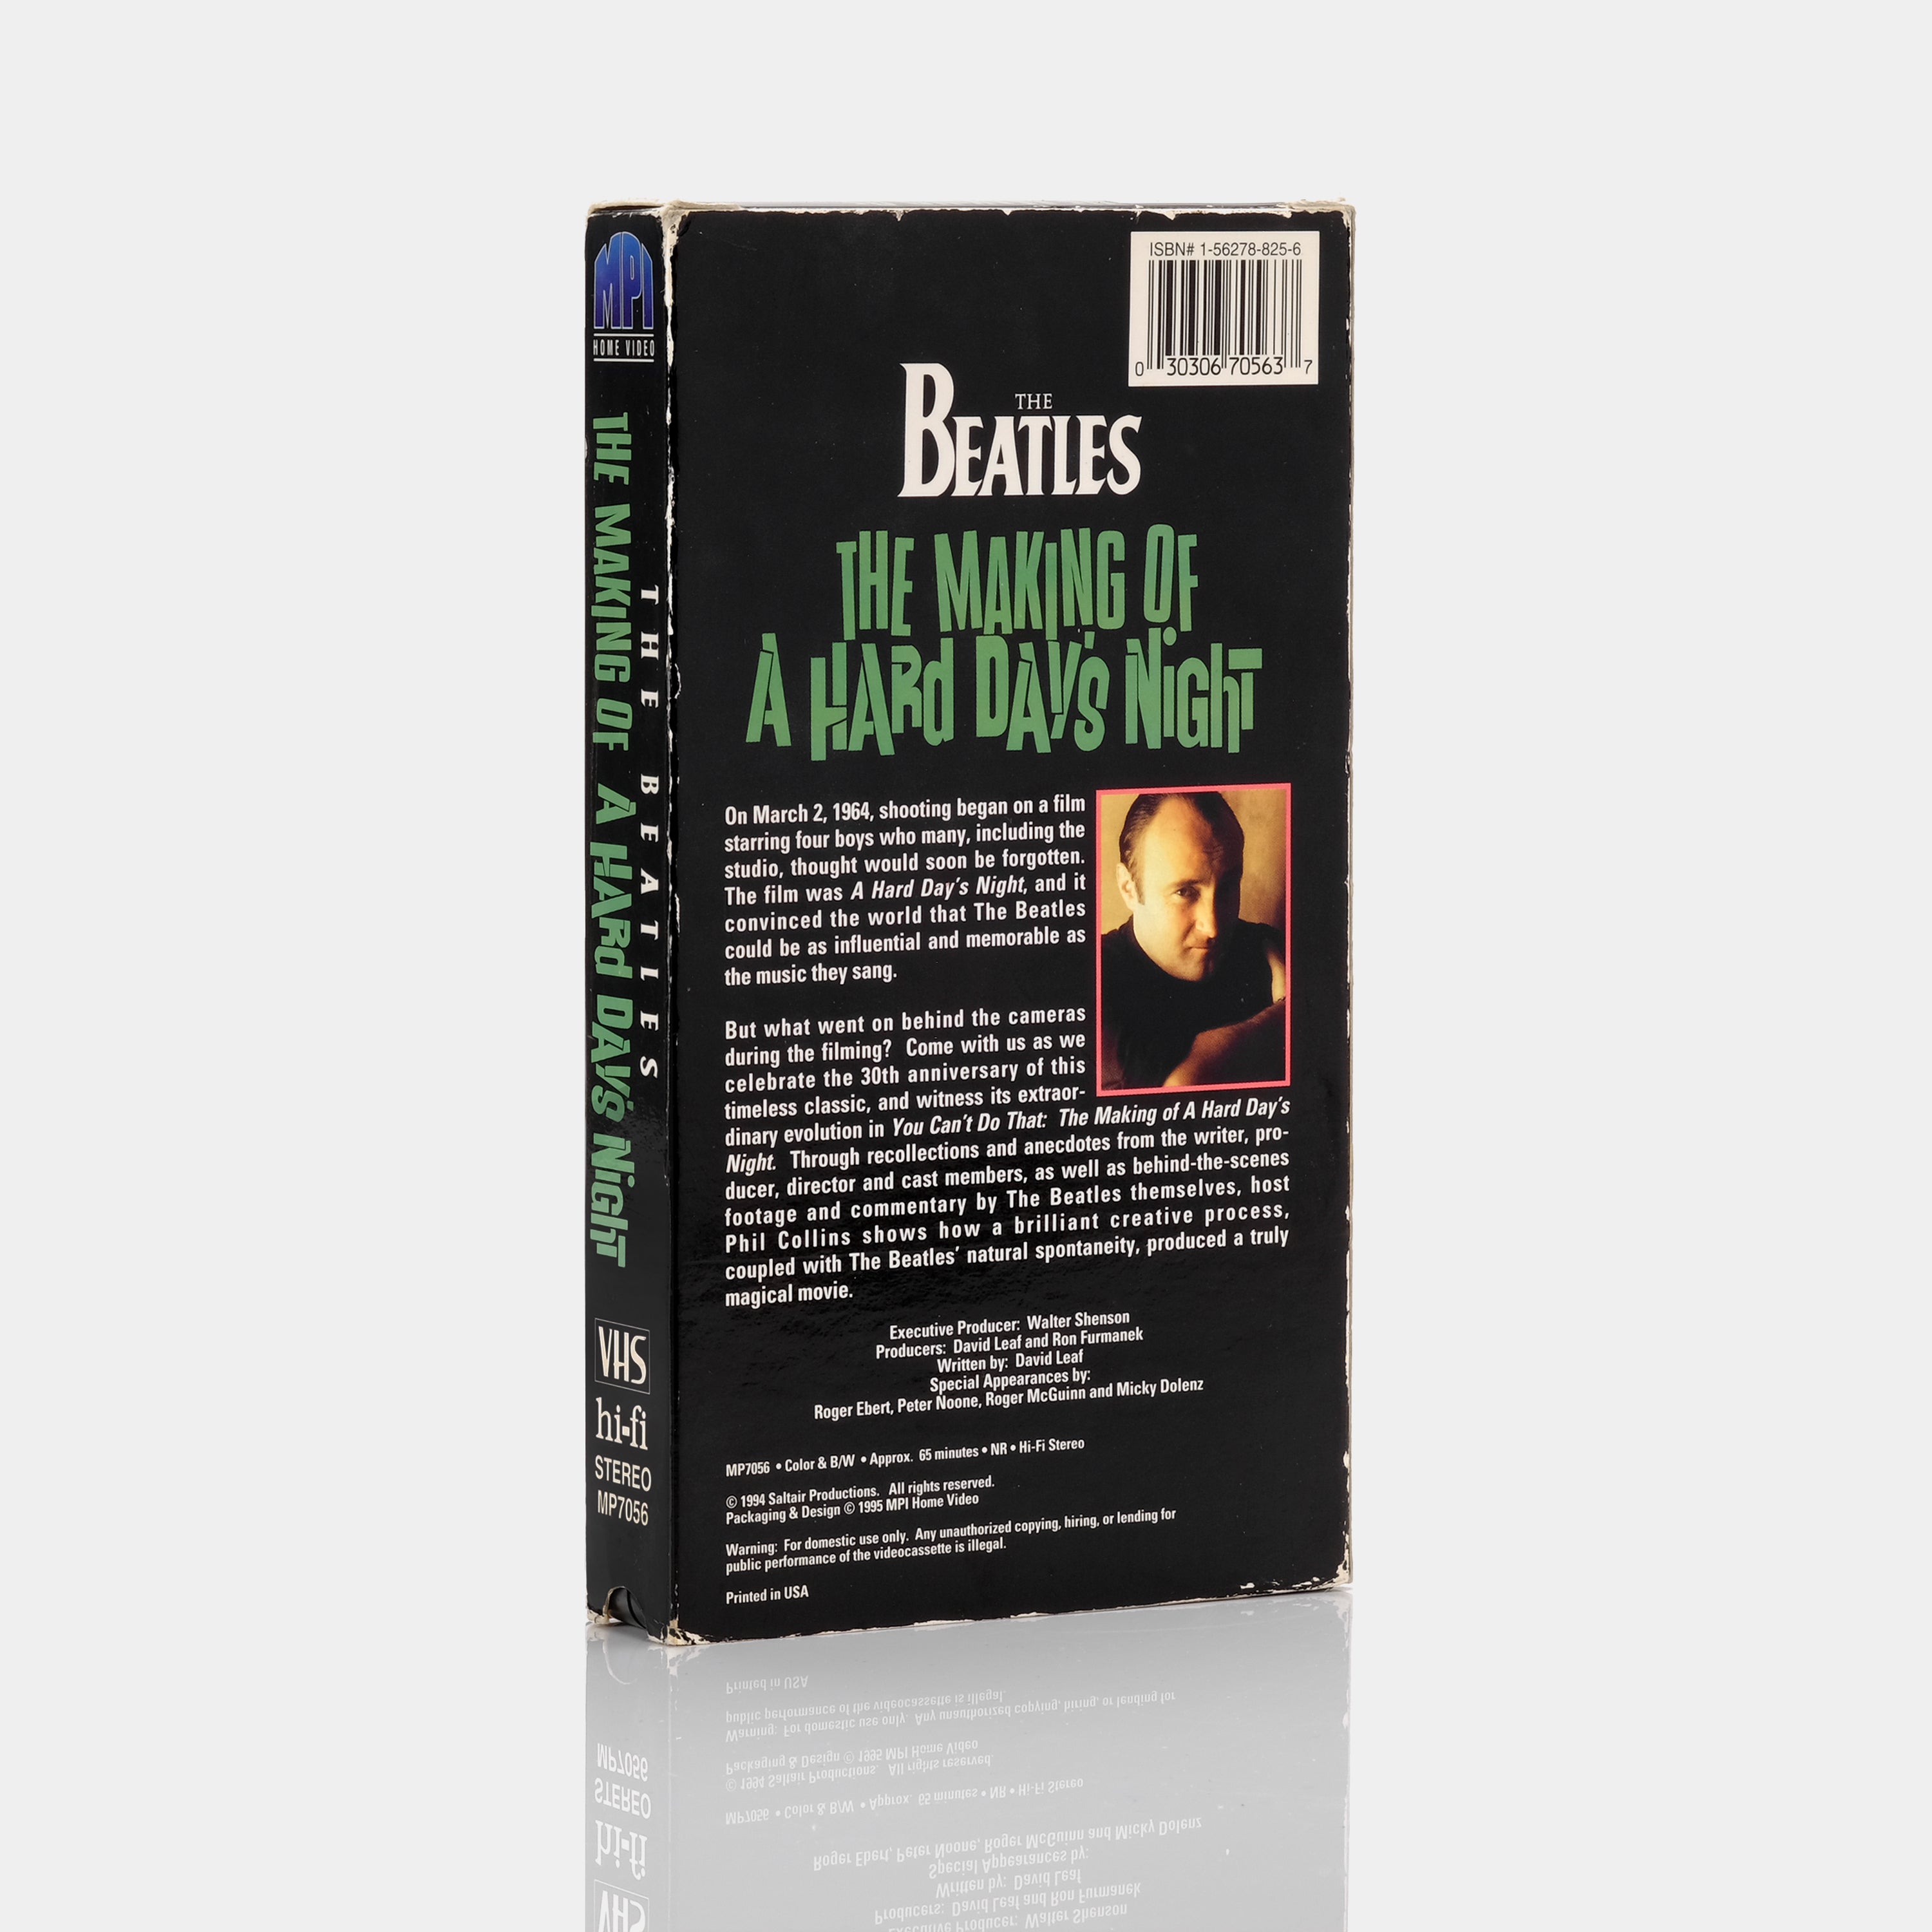 The Beatles: The Making Of A Hard Day's Night VHS Tape